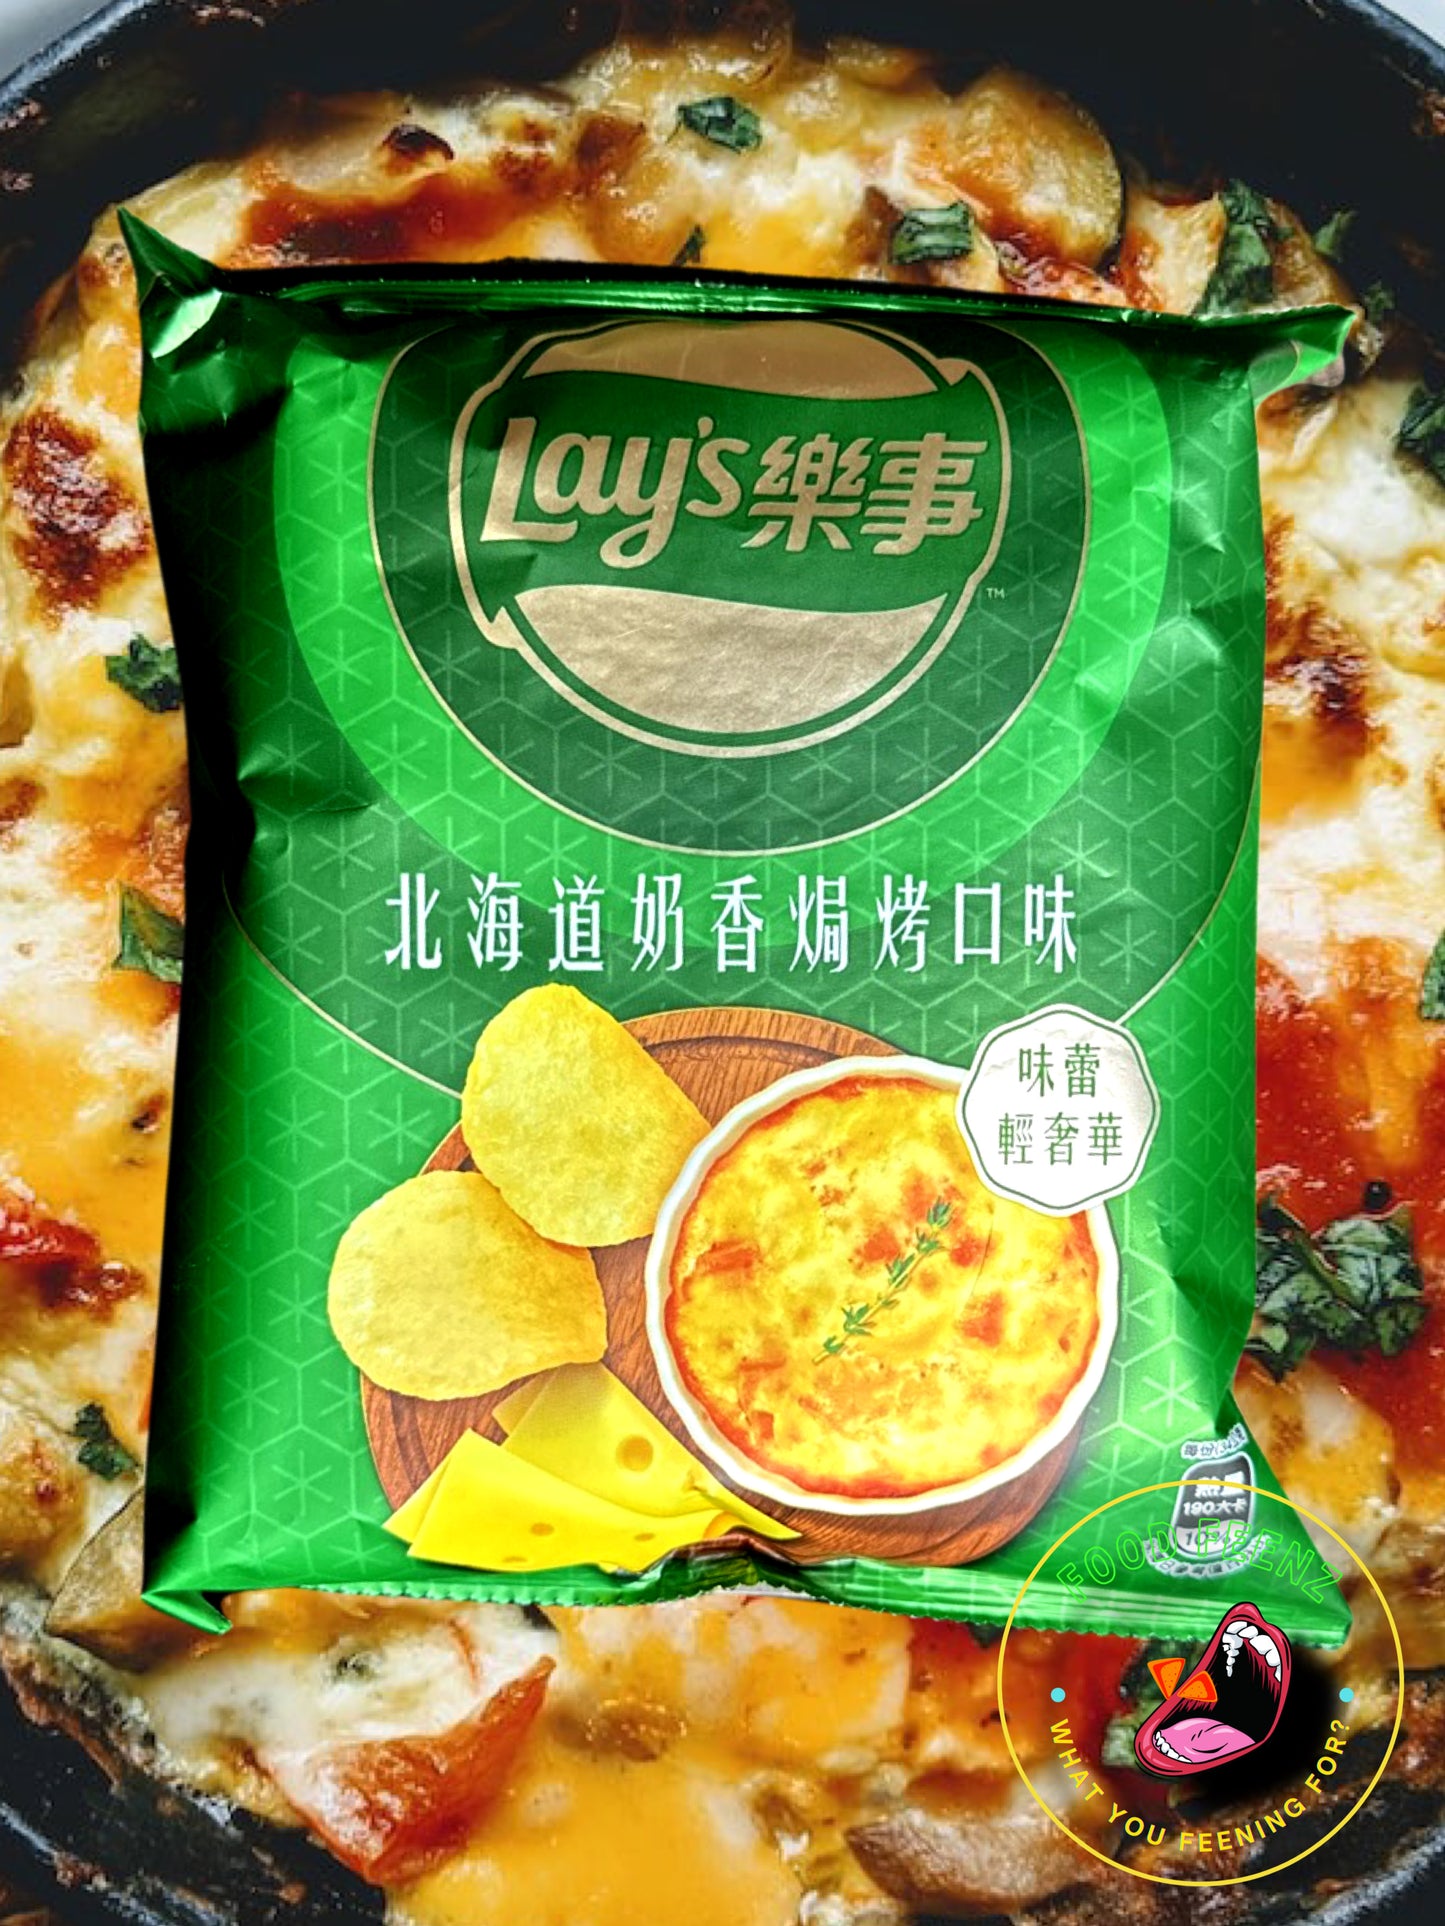 Lay's Baked Cheese Flavor (Taiwan)